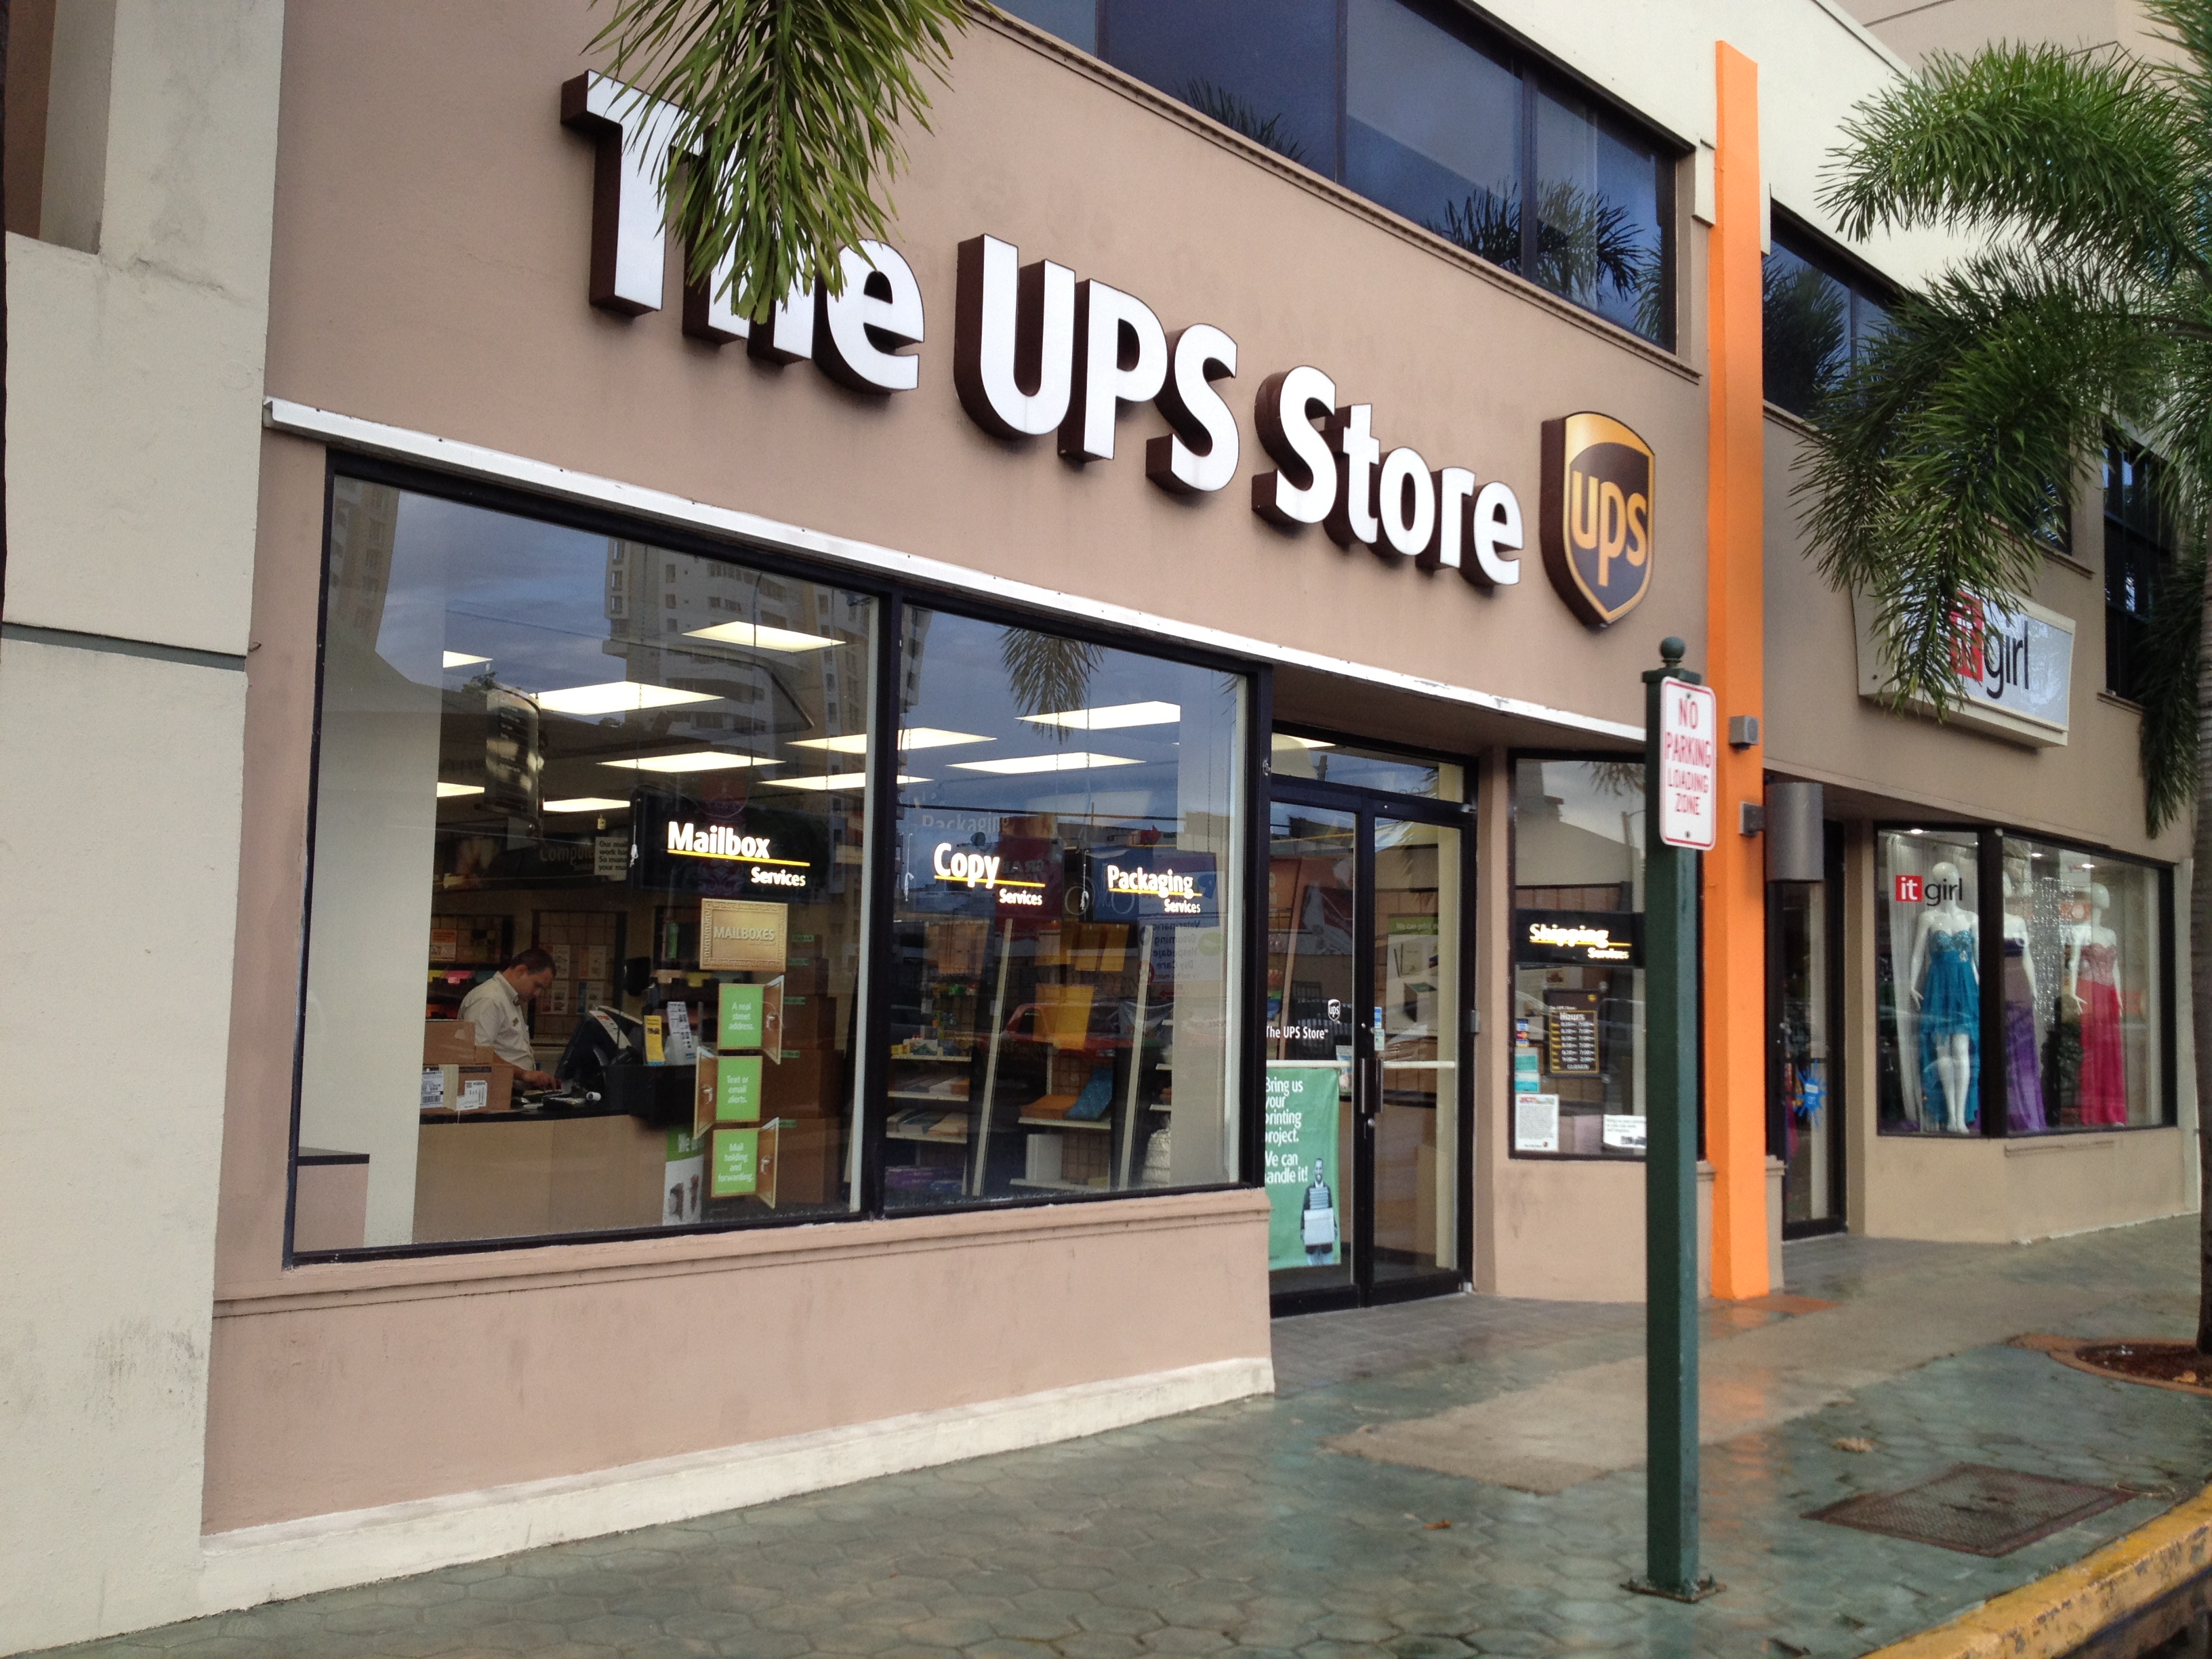 UPS HOURS | What Time Does UPS Close-Open? is ups store open saturday